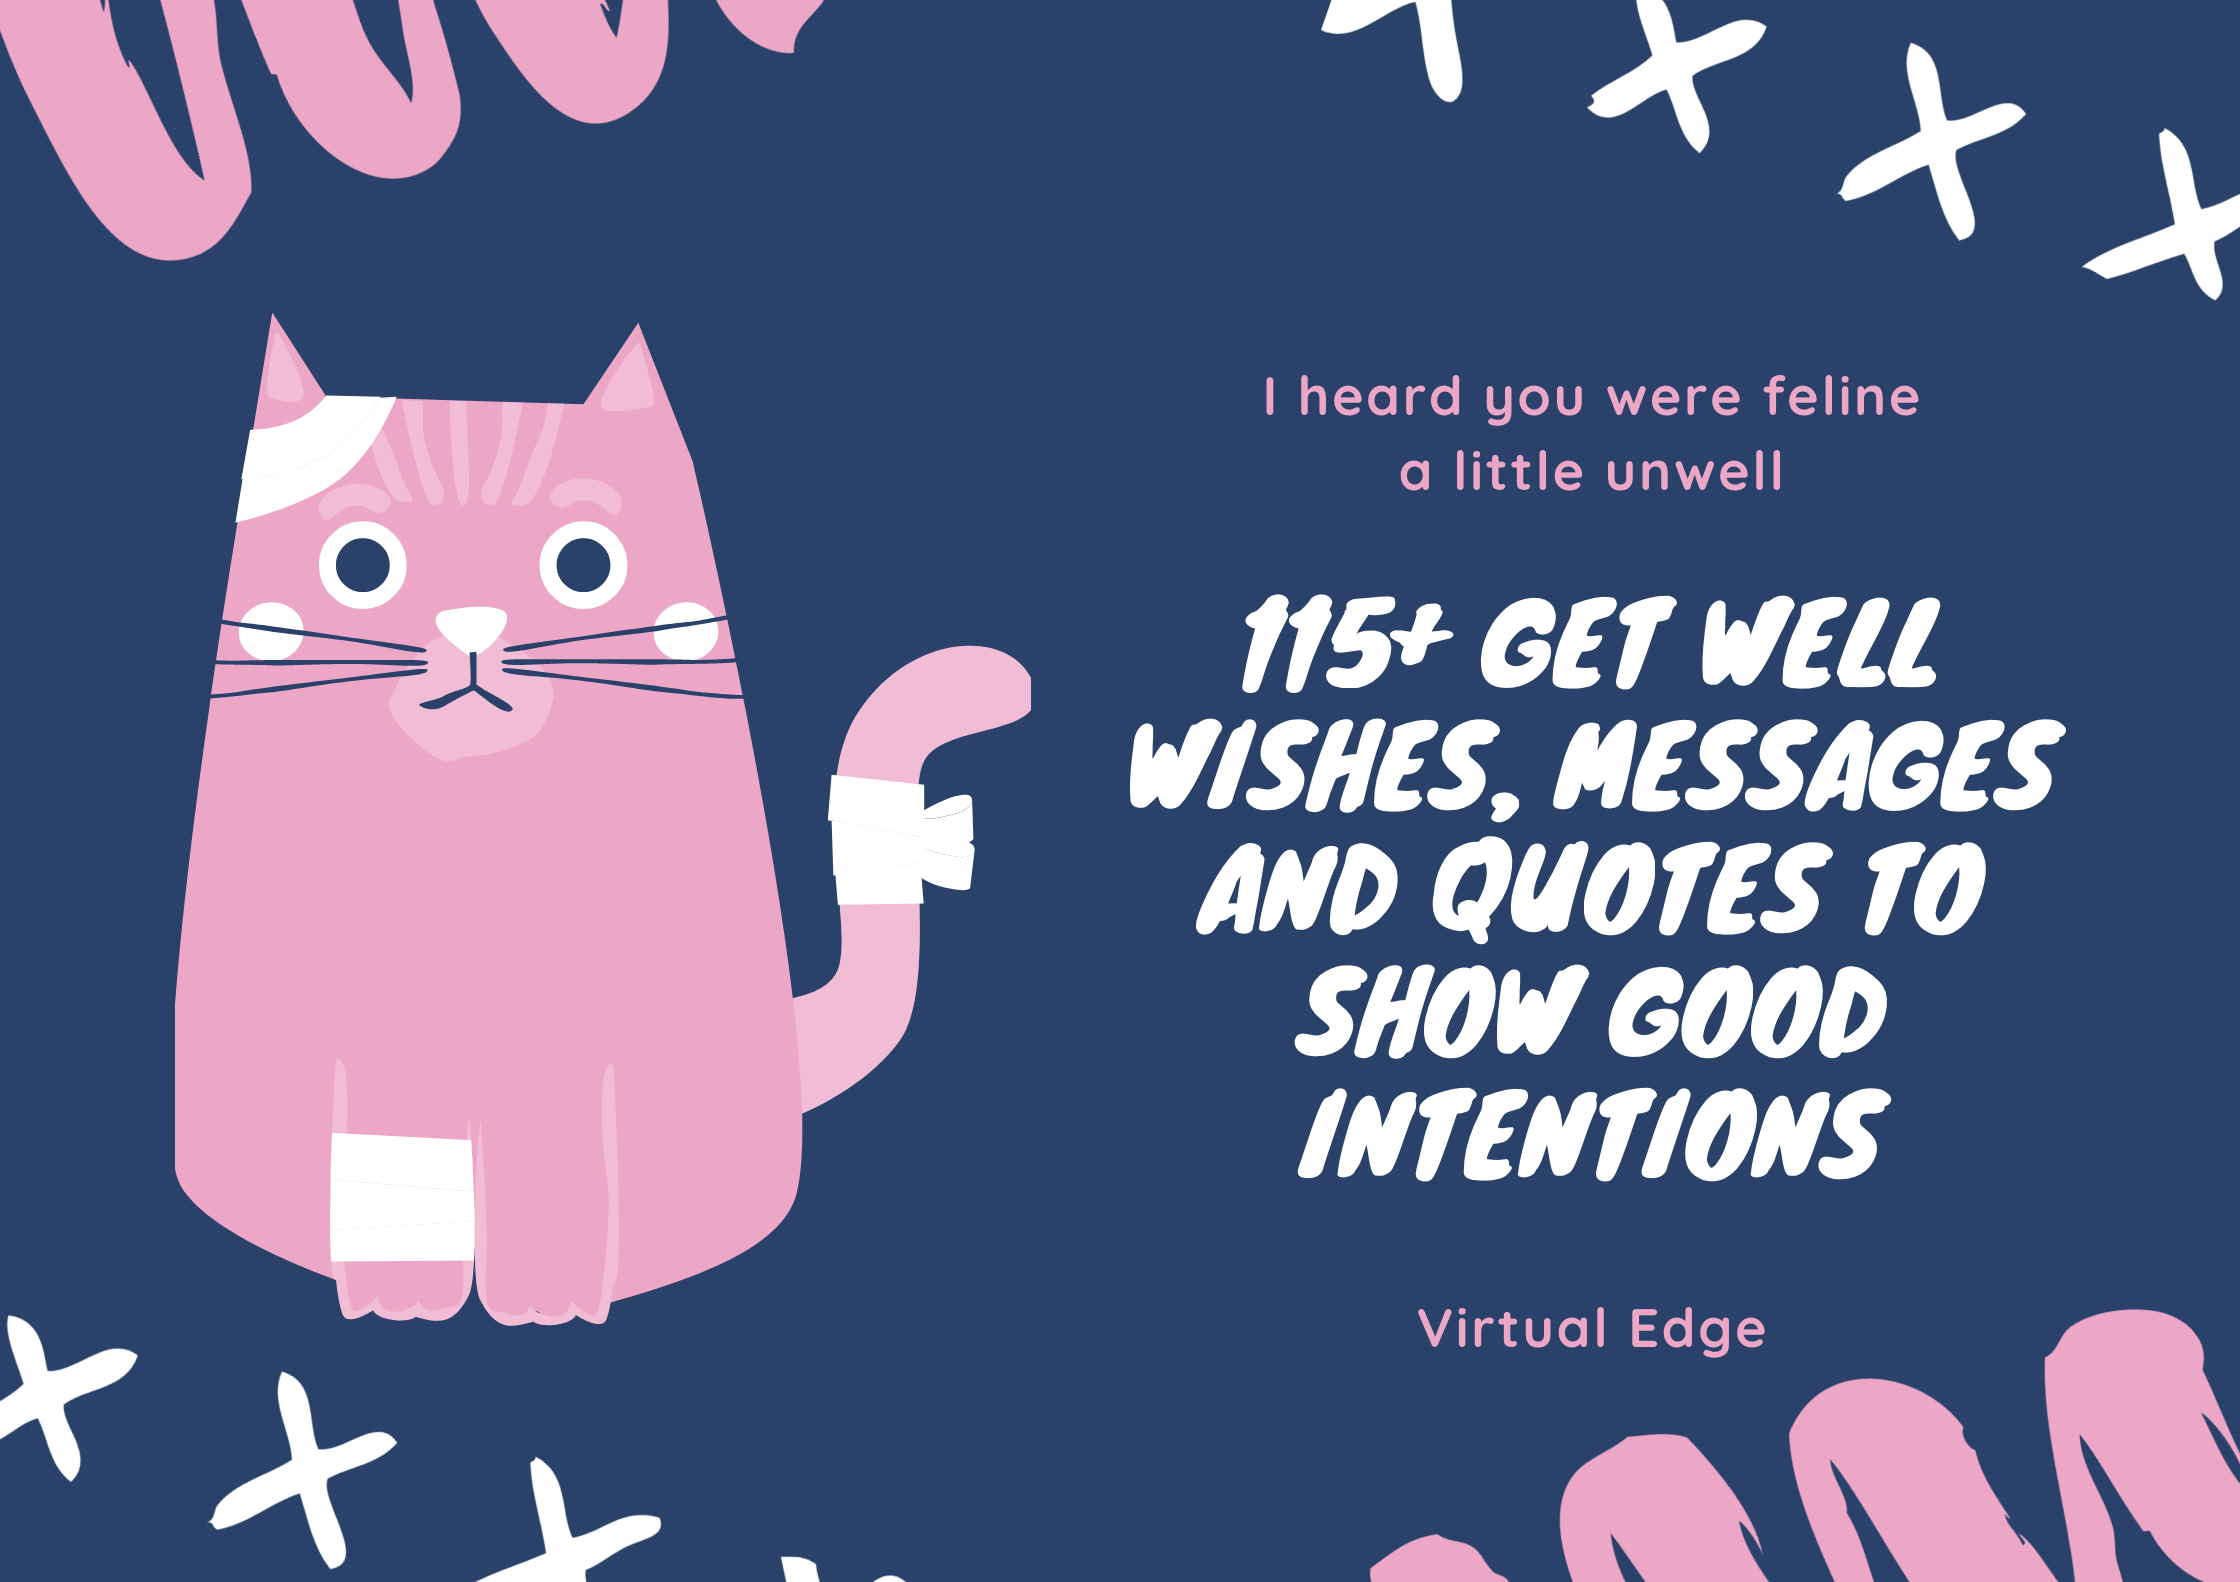 115+ Get Well Wishes, Messages and Quotes to Show Good Intentions